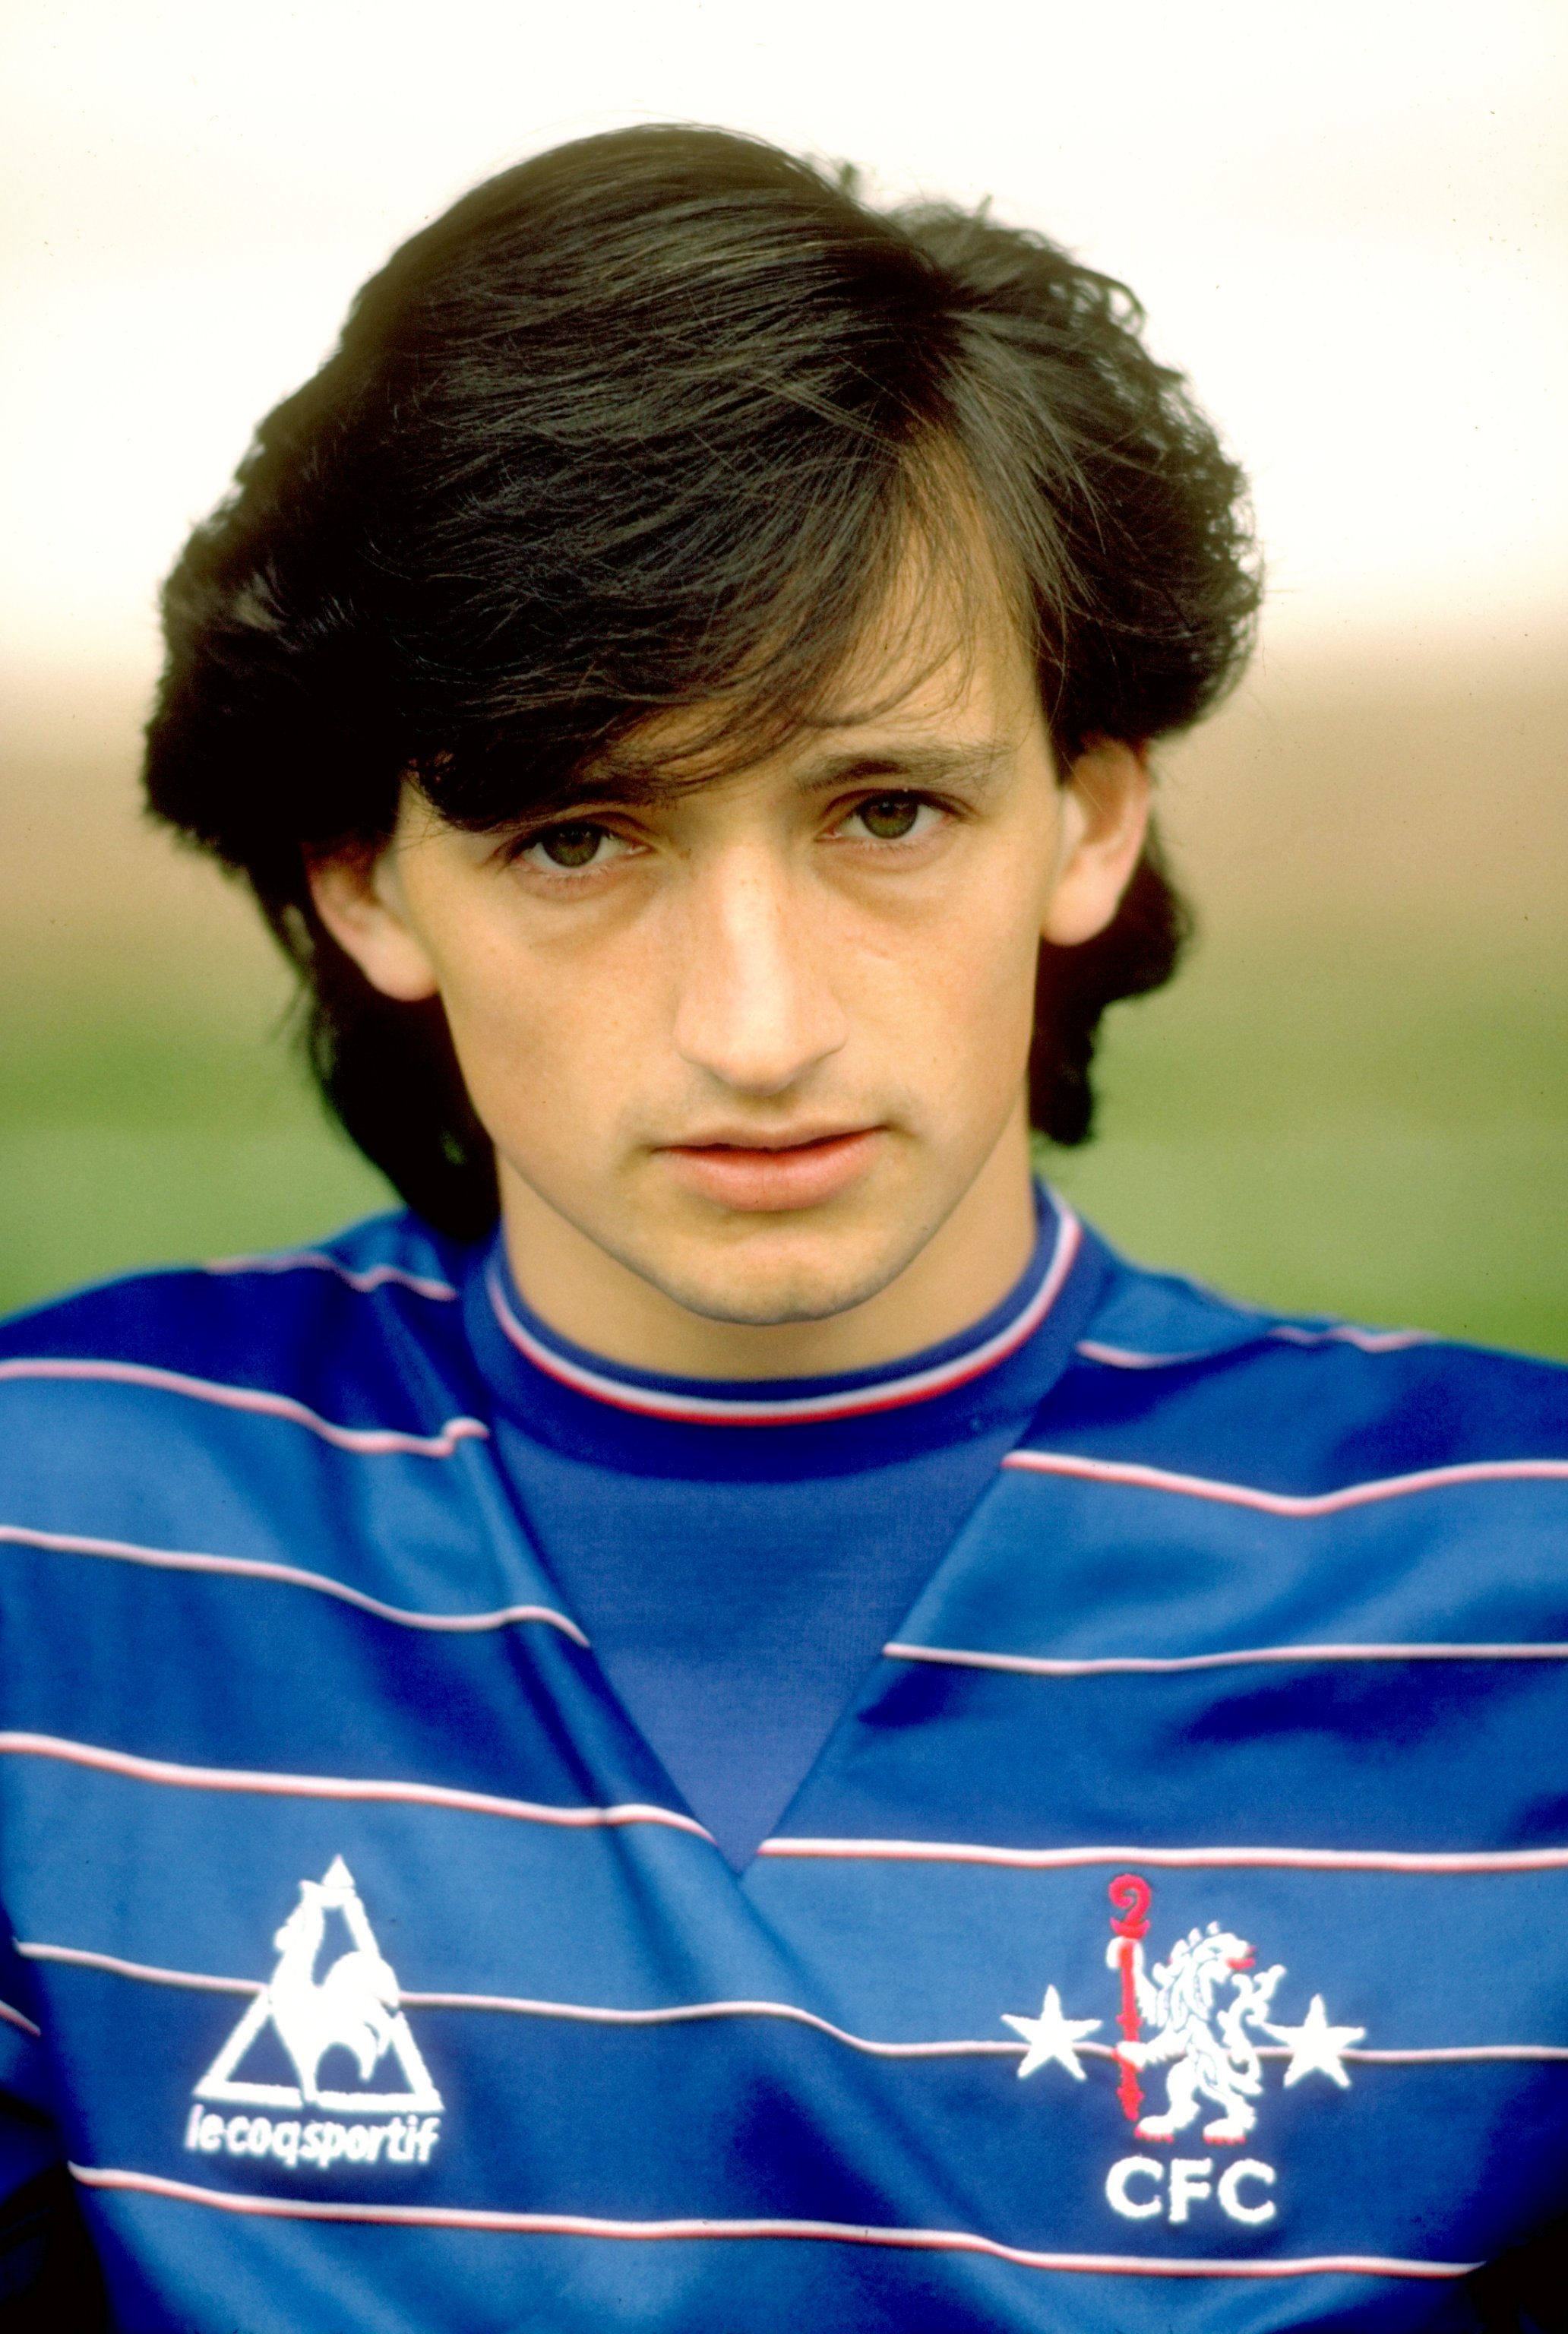  Nevin in his younger days at Chelsea